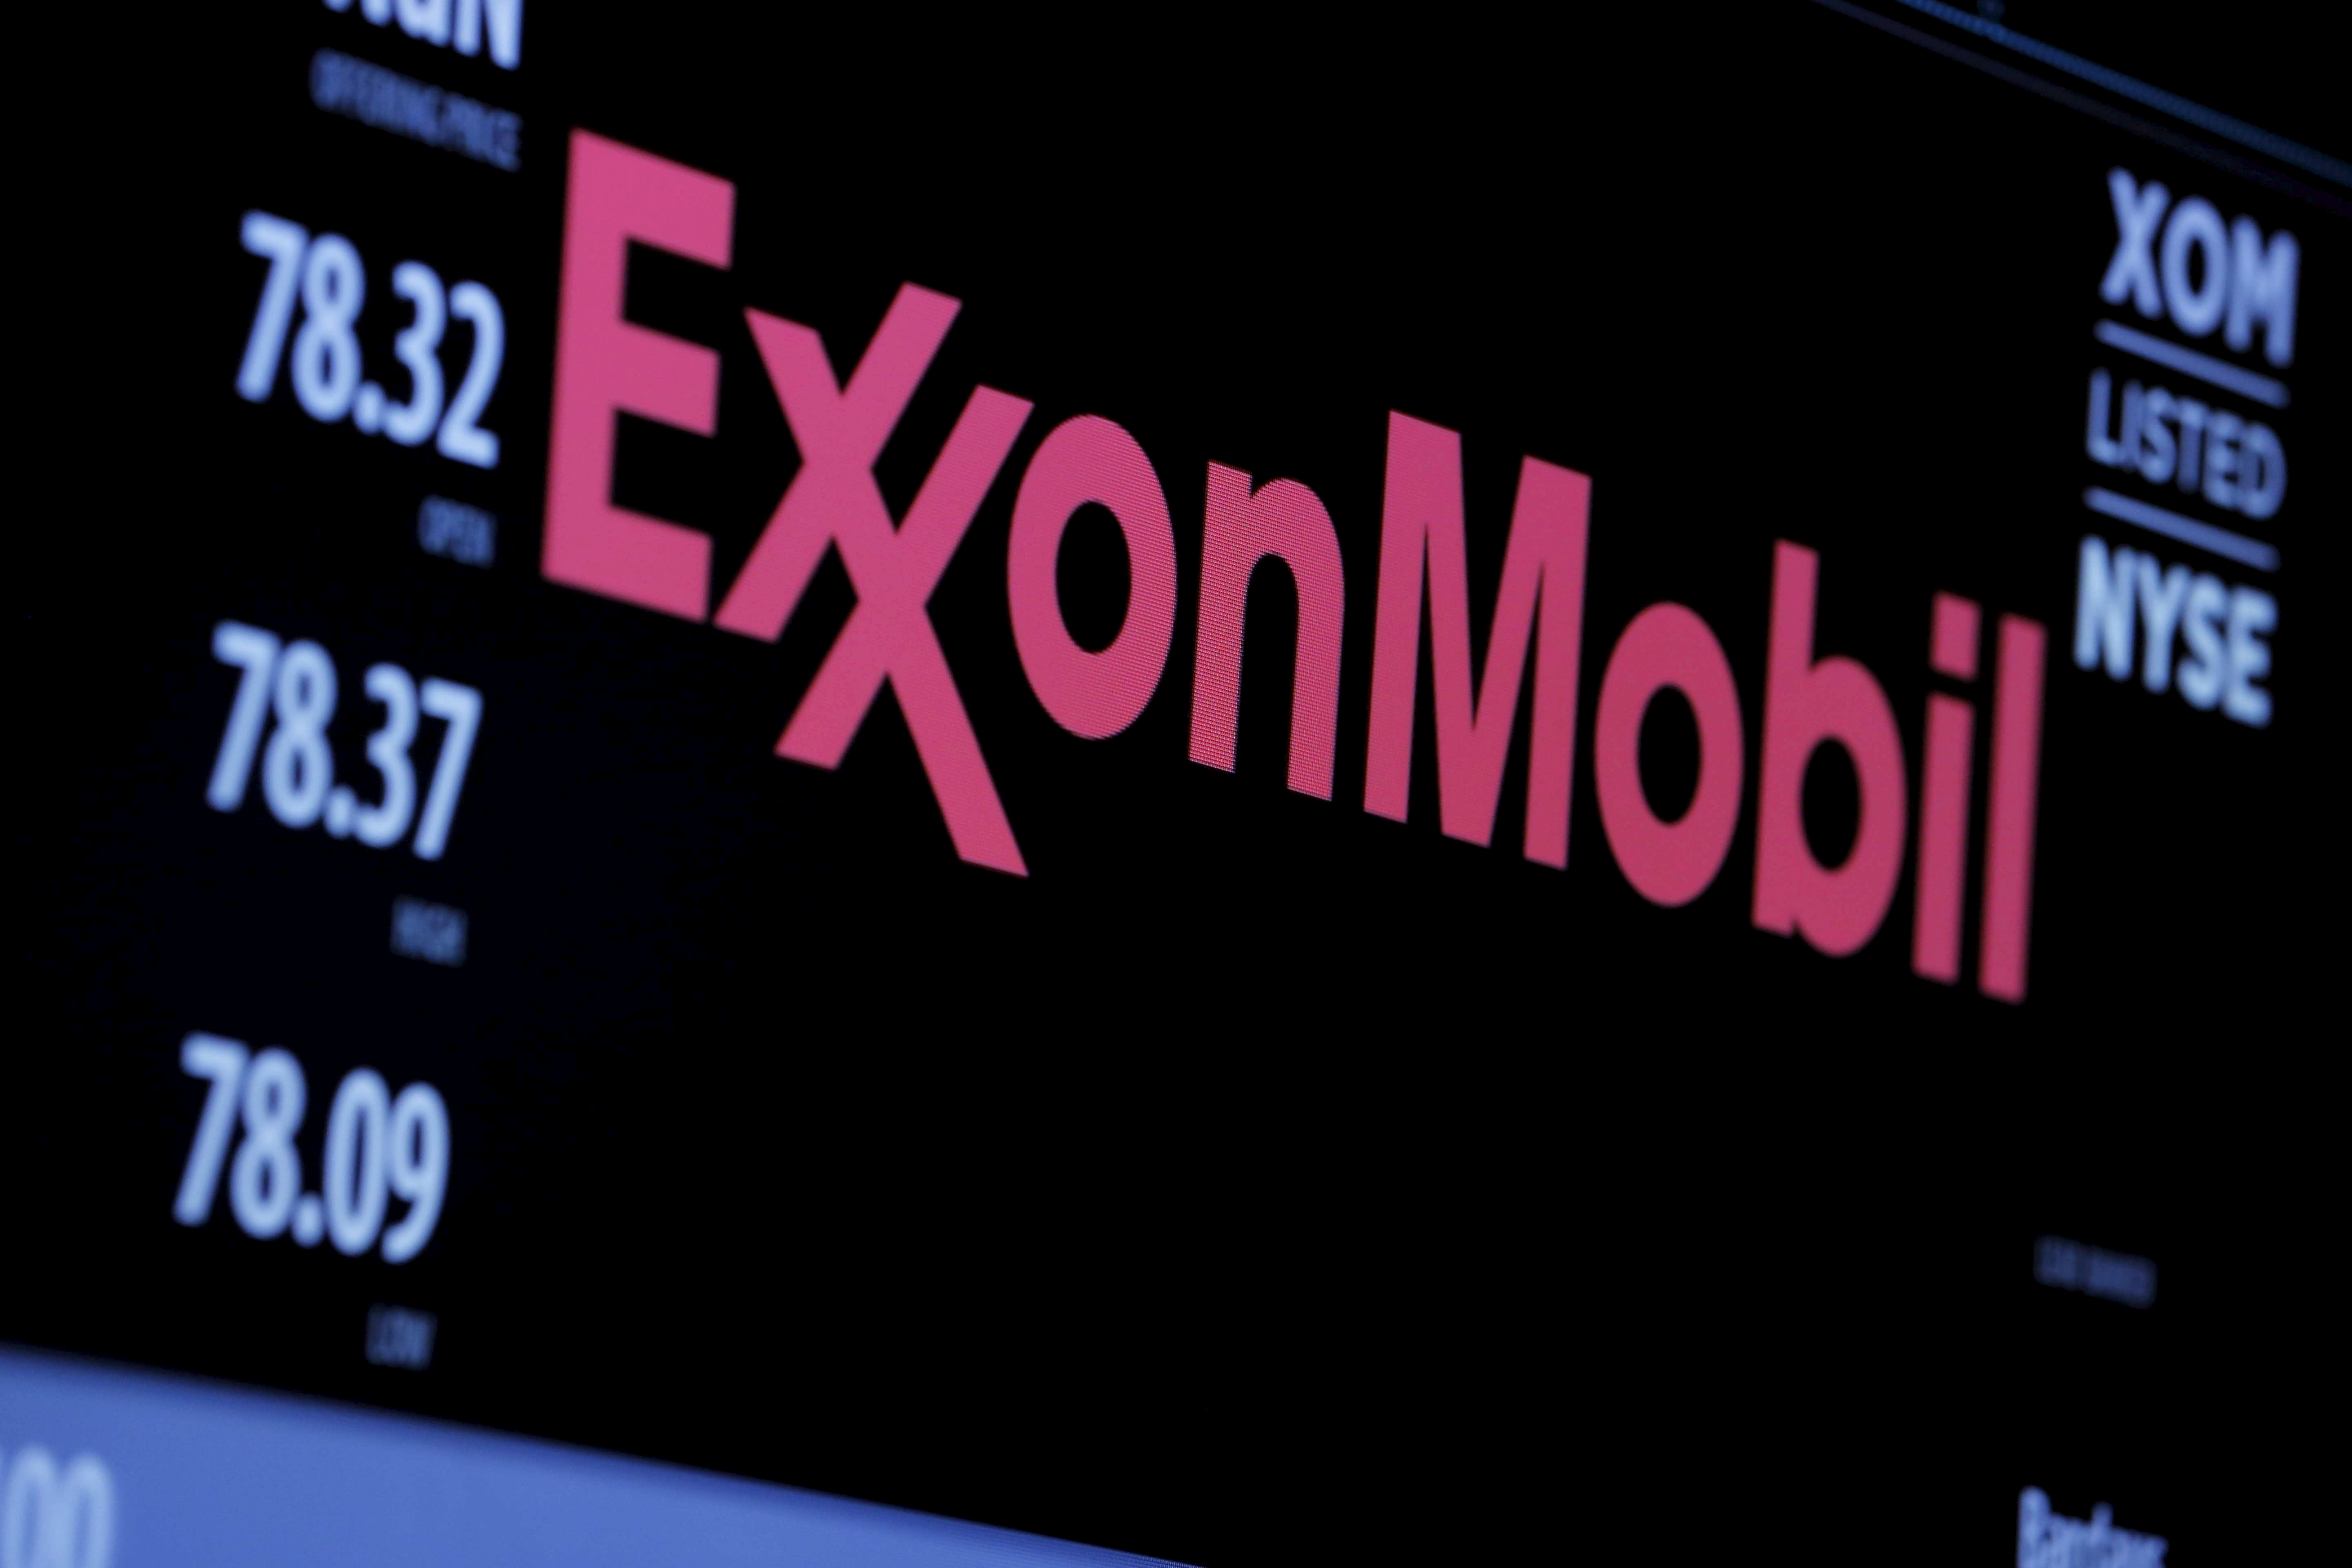 The logo of Exxon Mobil Corporation is shown on a monitor above the floor of the New York Stock Exchange in New York, December 30, 2015. . REUTERS/Lucas Jackson